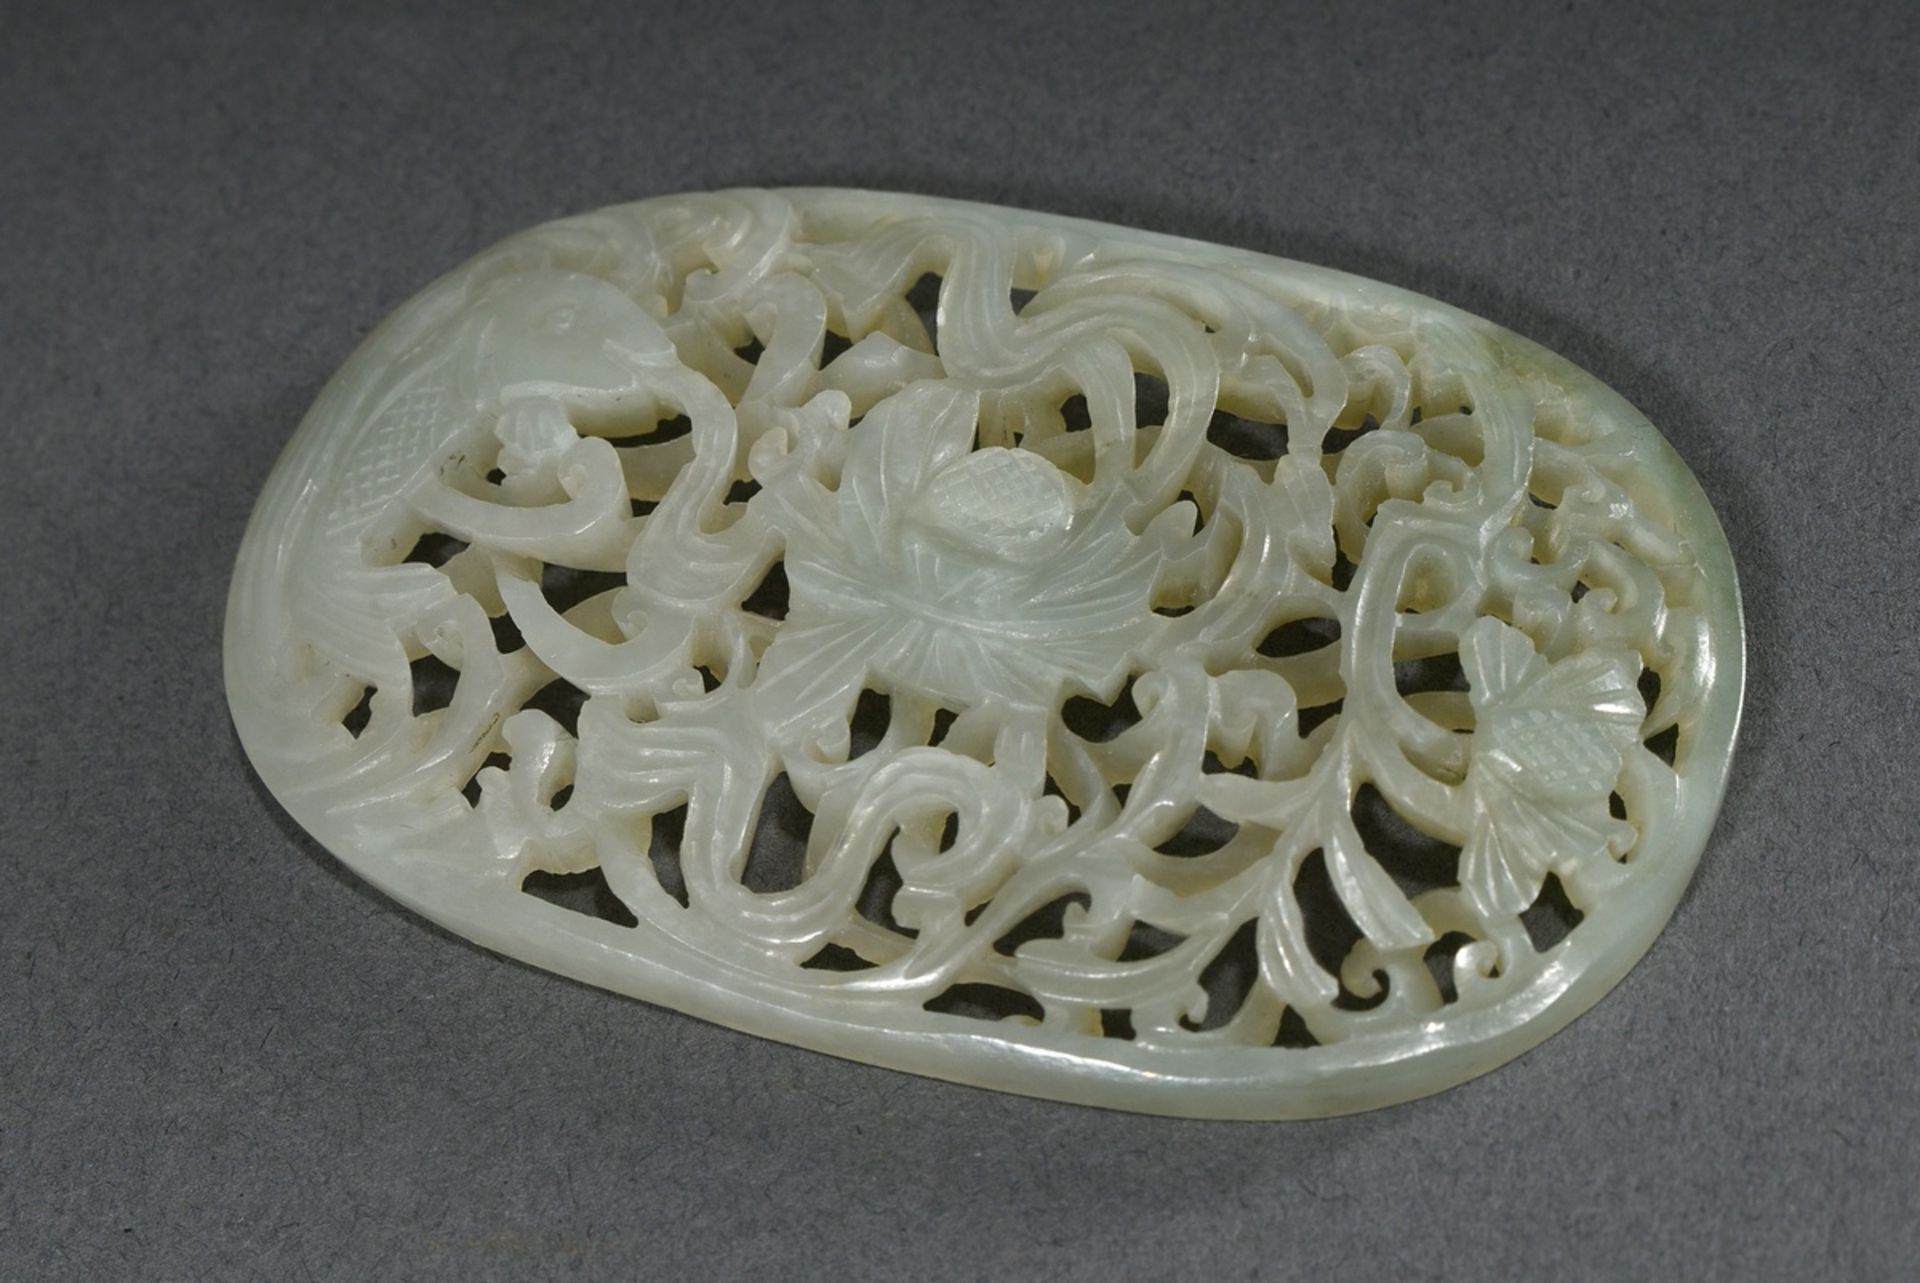 Elliptical celadonjade badge in Ming style "Carp in lotus pond" in very fine carving on two levels, - Image 3 of 7